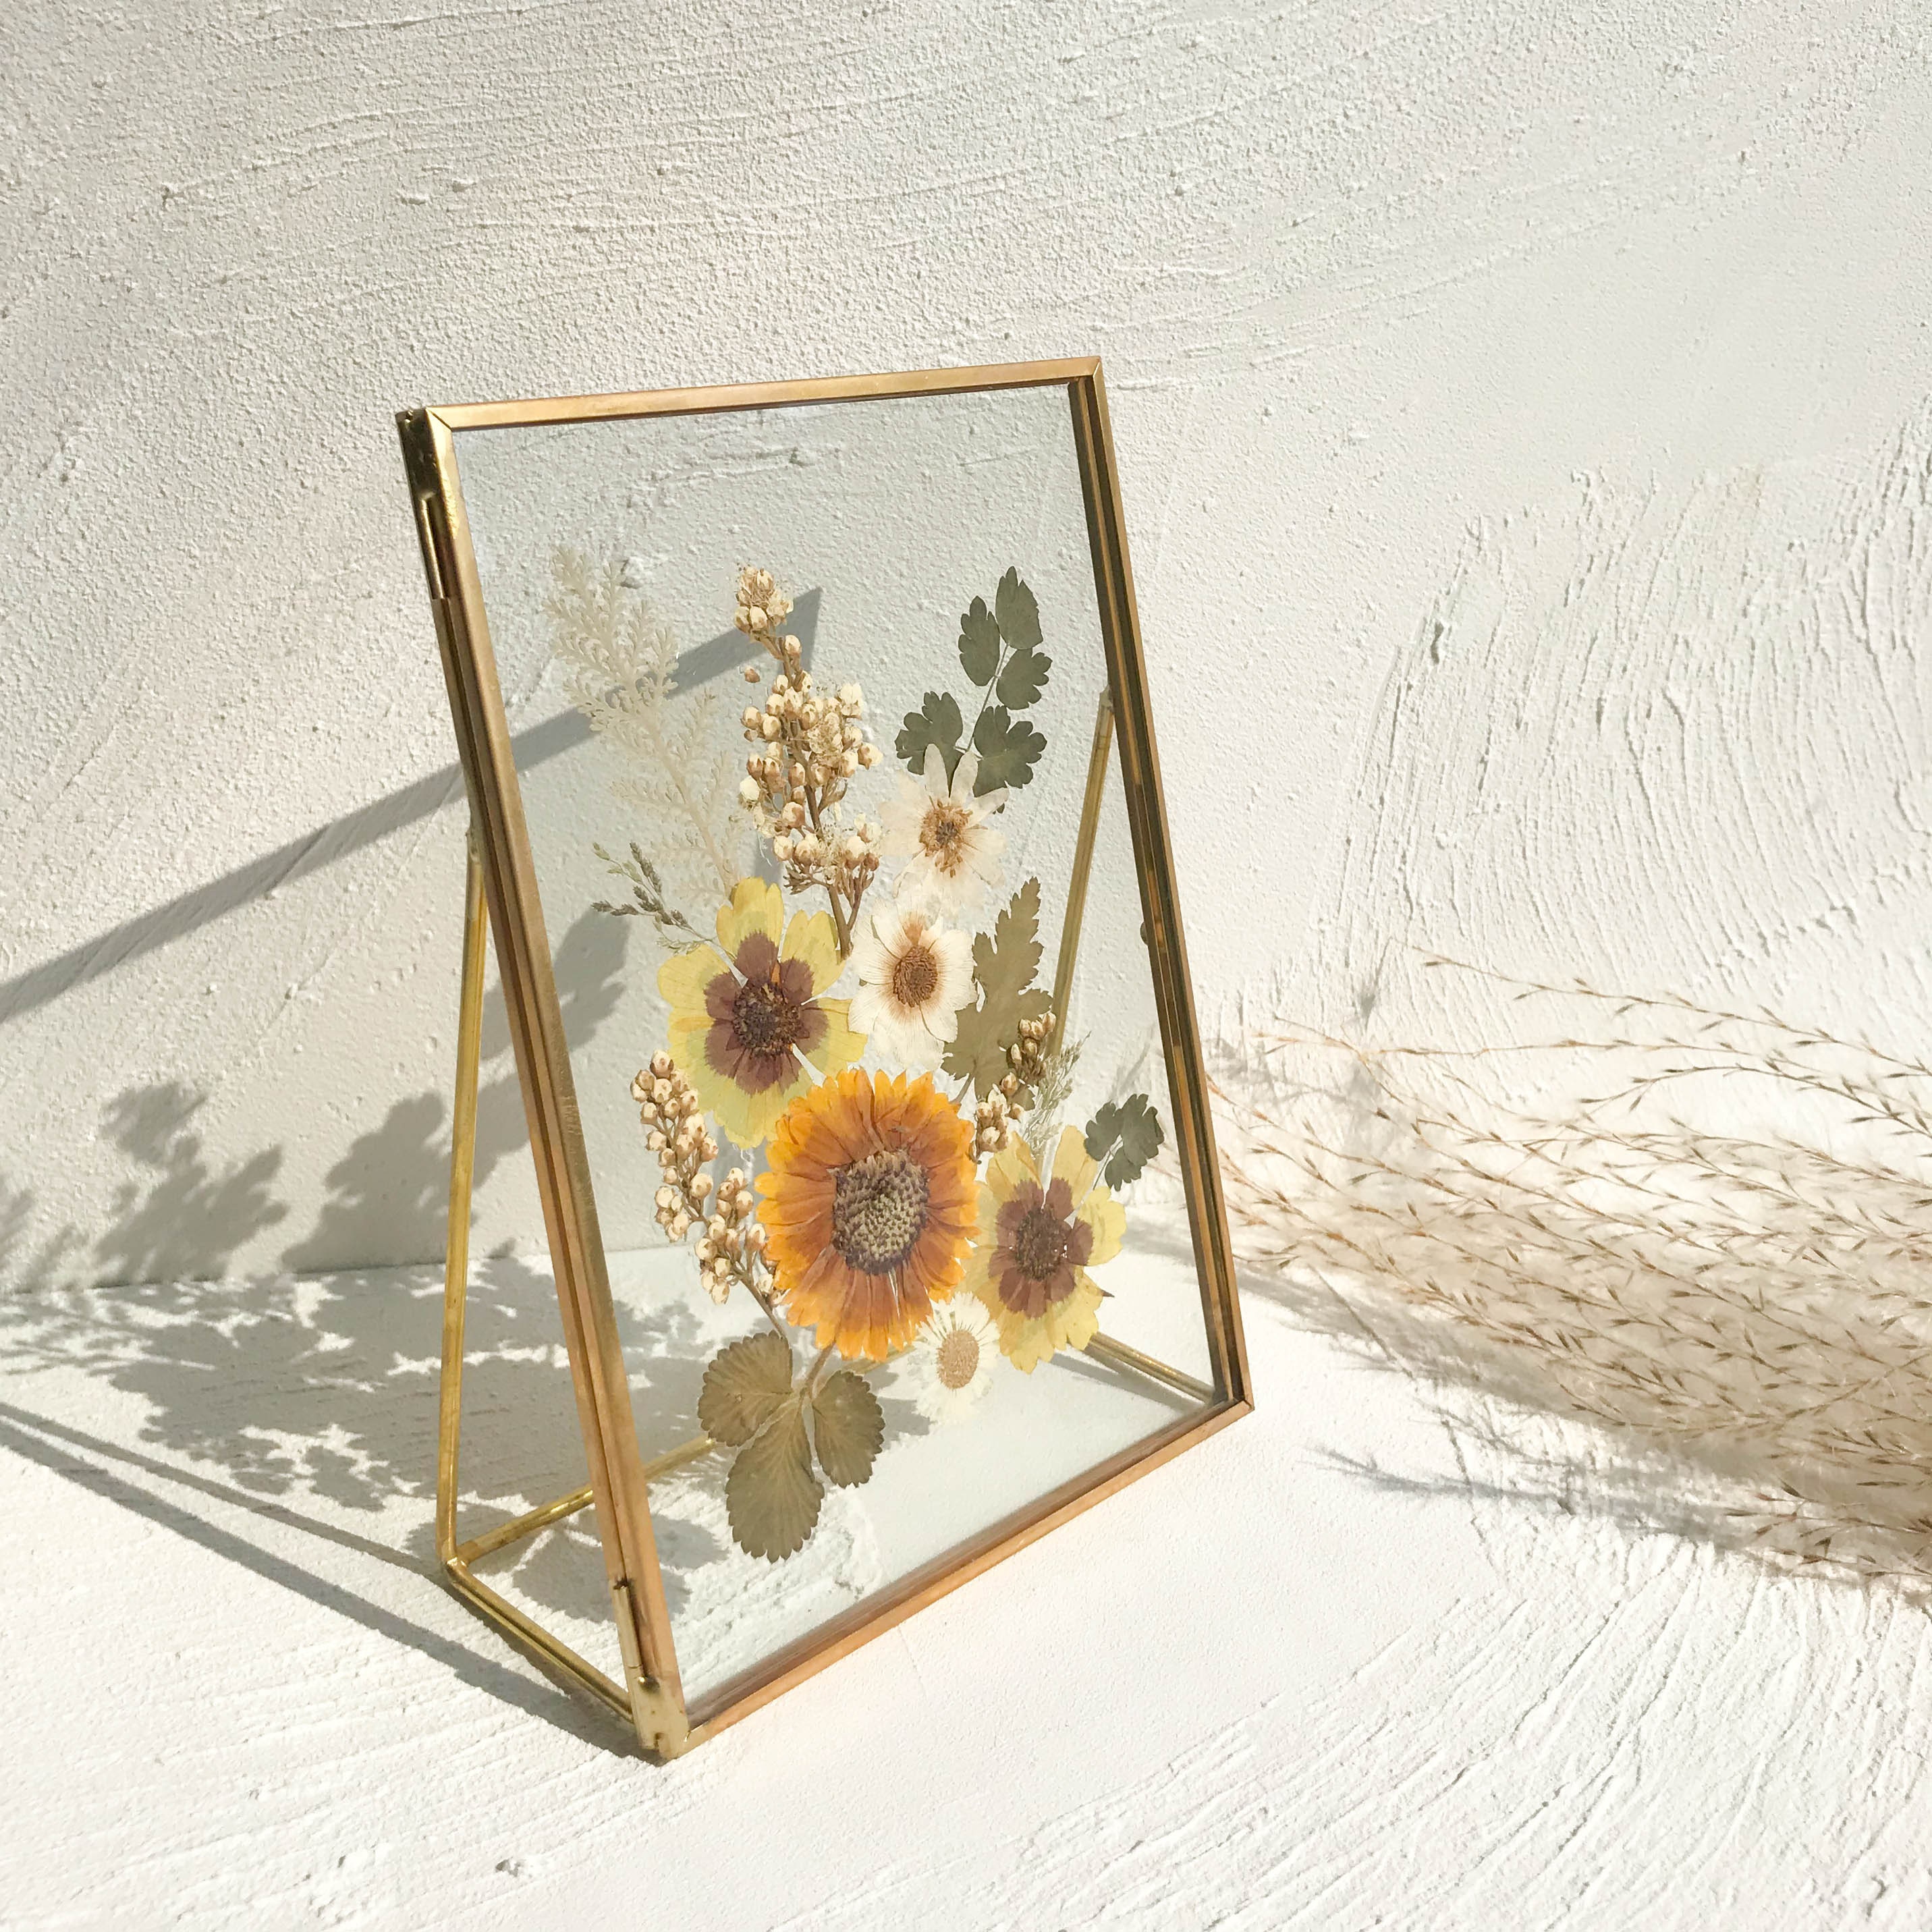 Vintage PRESSED FLOWERS in frame of gold in seconds - Craftionary